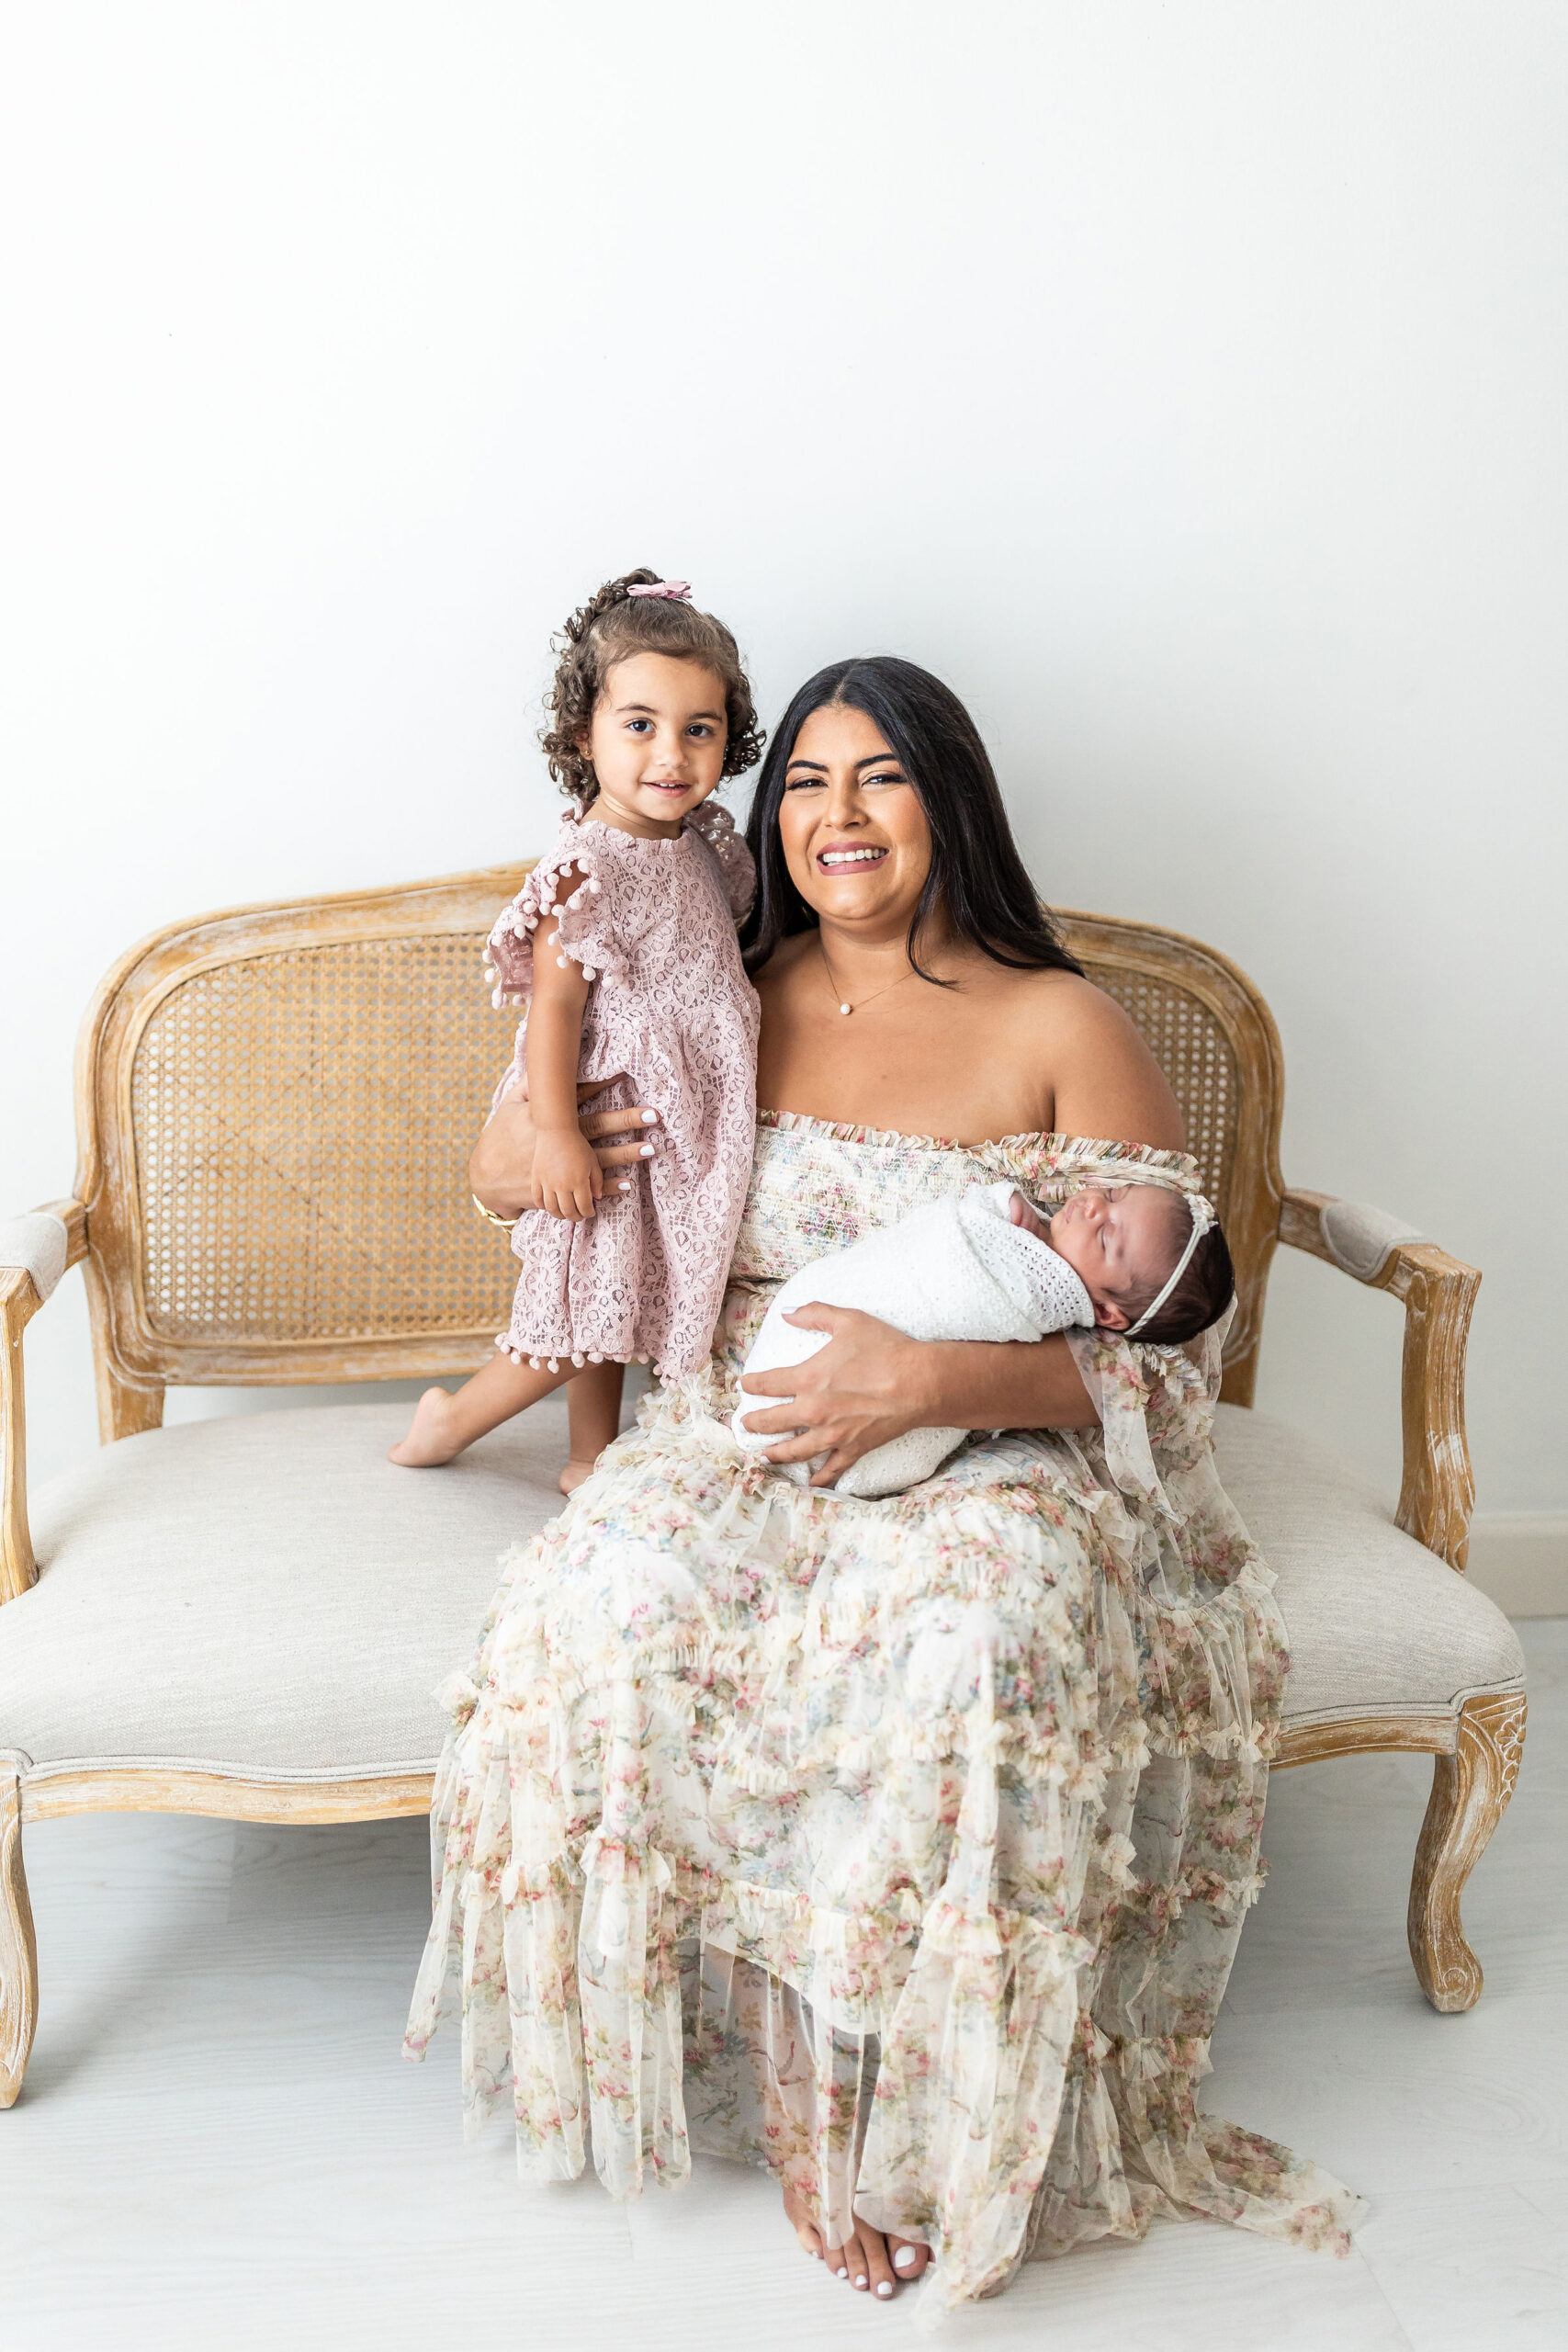 A happy mother in a long floral dress sits on a bench in a studio with her toddler daughter in a pink dress and newborn baby sleeping in one arm